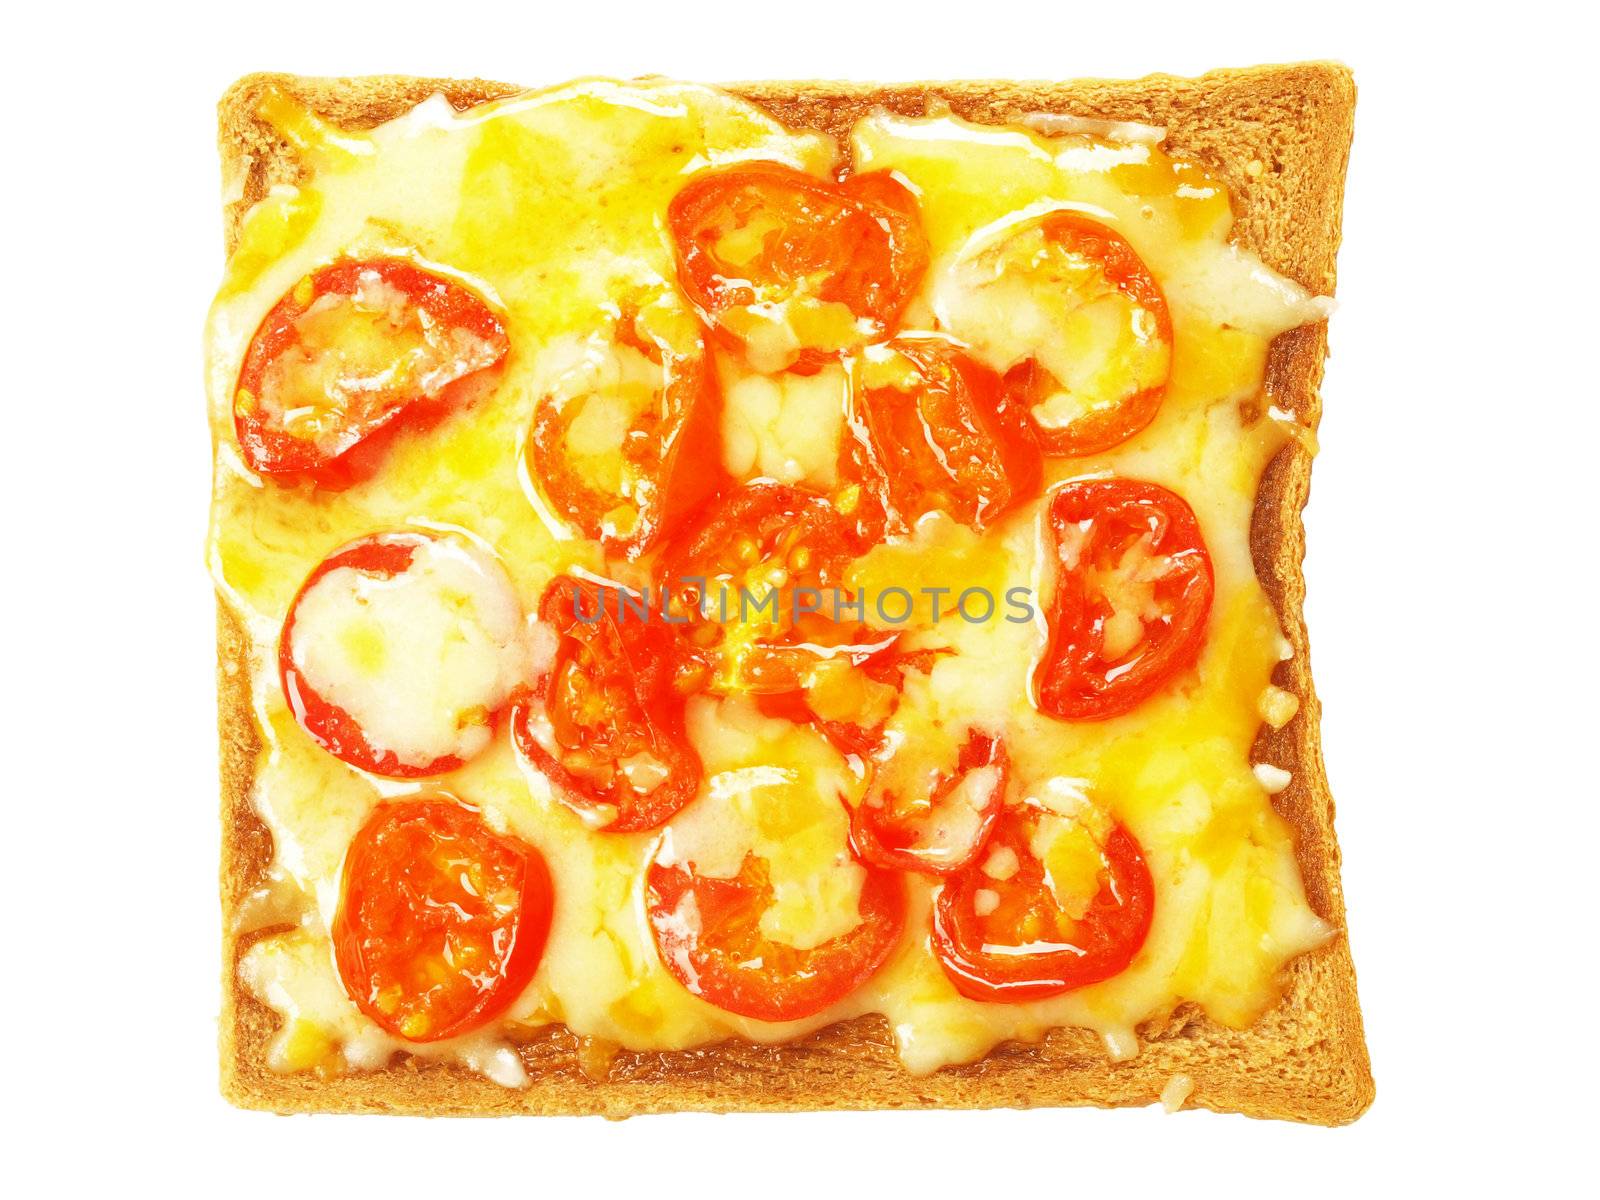 toast with melted cheese and tomatoes by zkruger